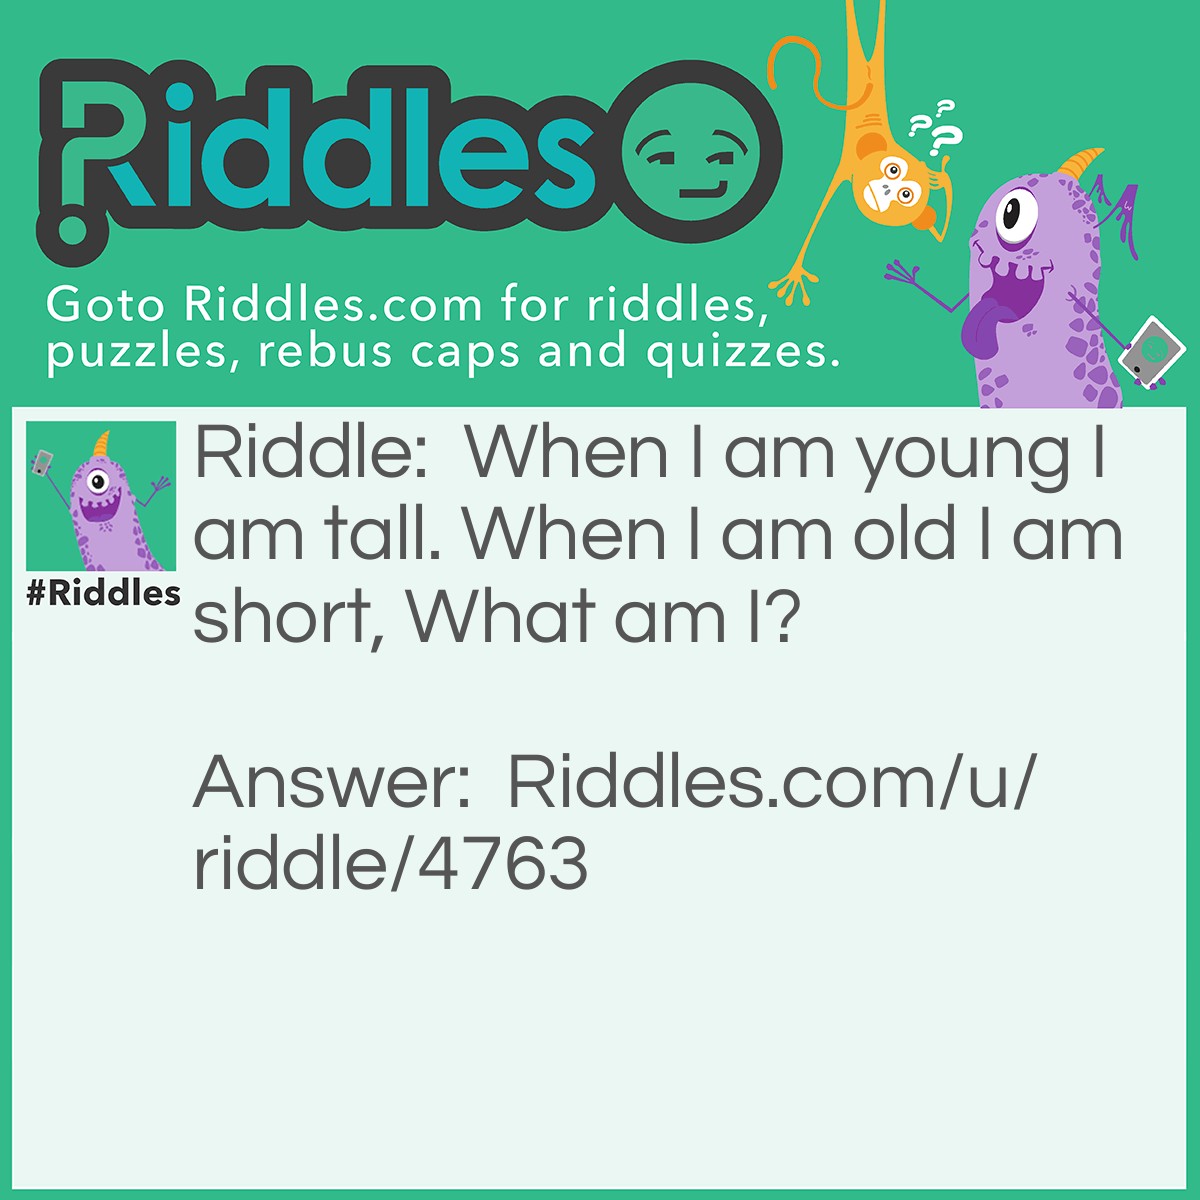 Riddle: When I am young I am tall. When I am old I am short, What am I? Answer: I am a candle.